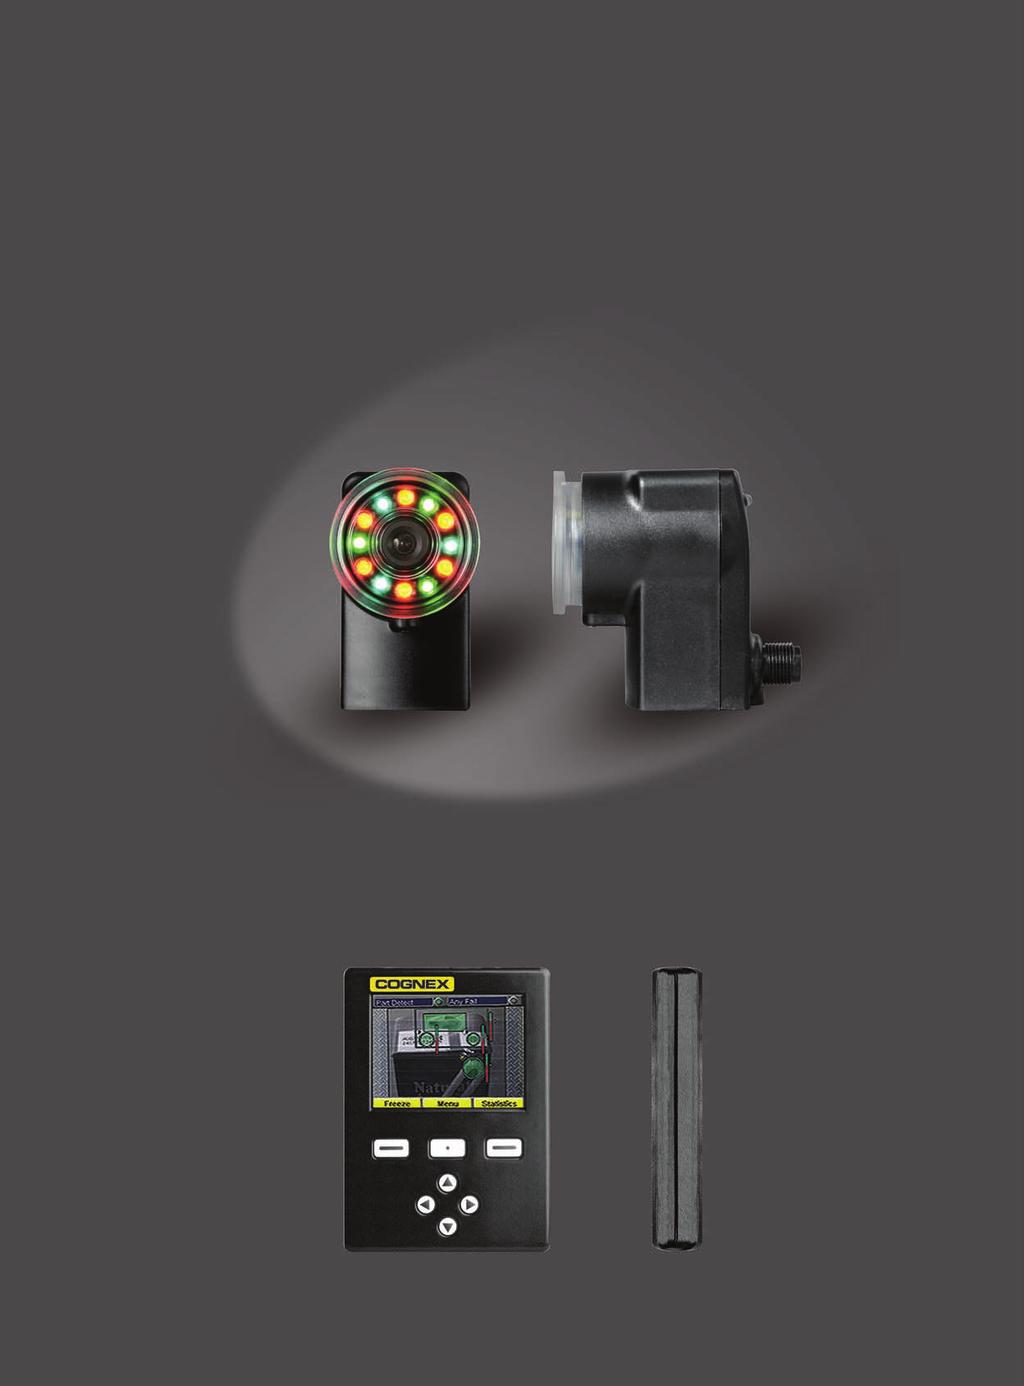 Powerful Things Come in Small Packages Checker is an all-in-one vision sensor with built-in lighting and a variable working distance, capable of inspecting over 6000 parts per minute all in a package